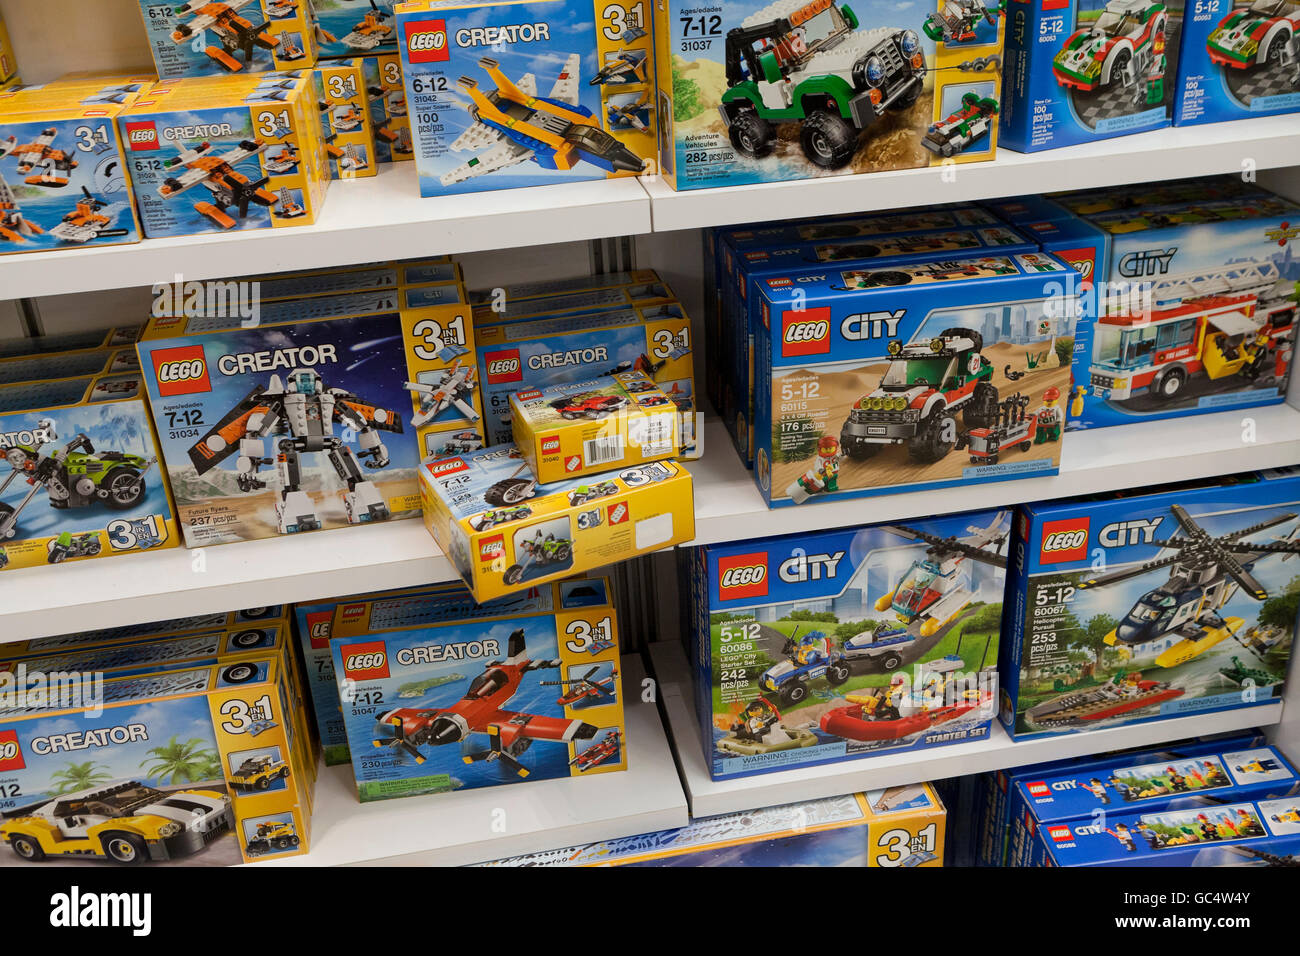 LEGO toys on display on shelves at toy store - USA Stock Photo